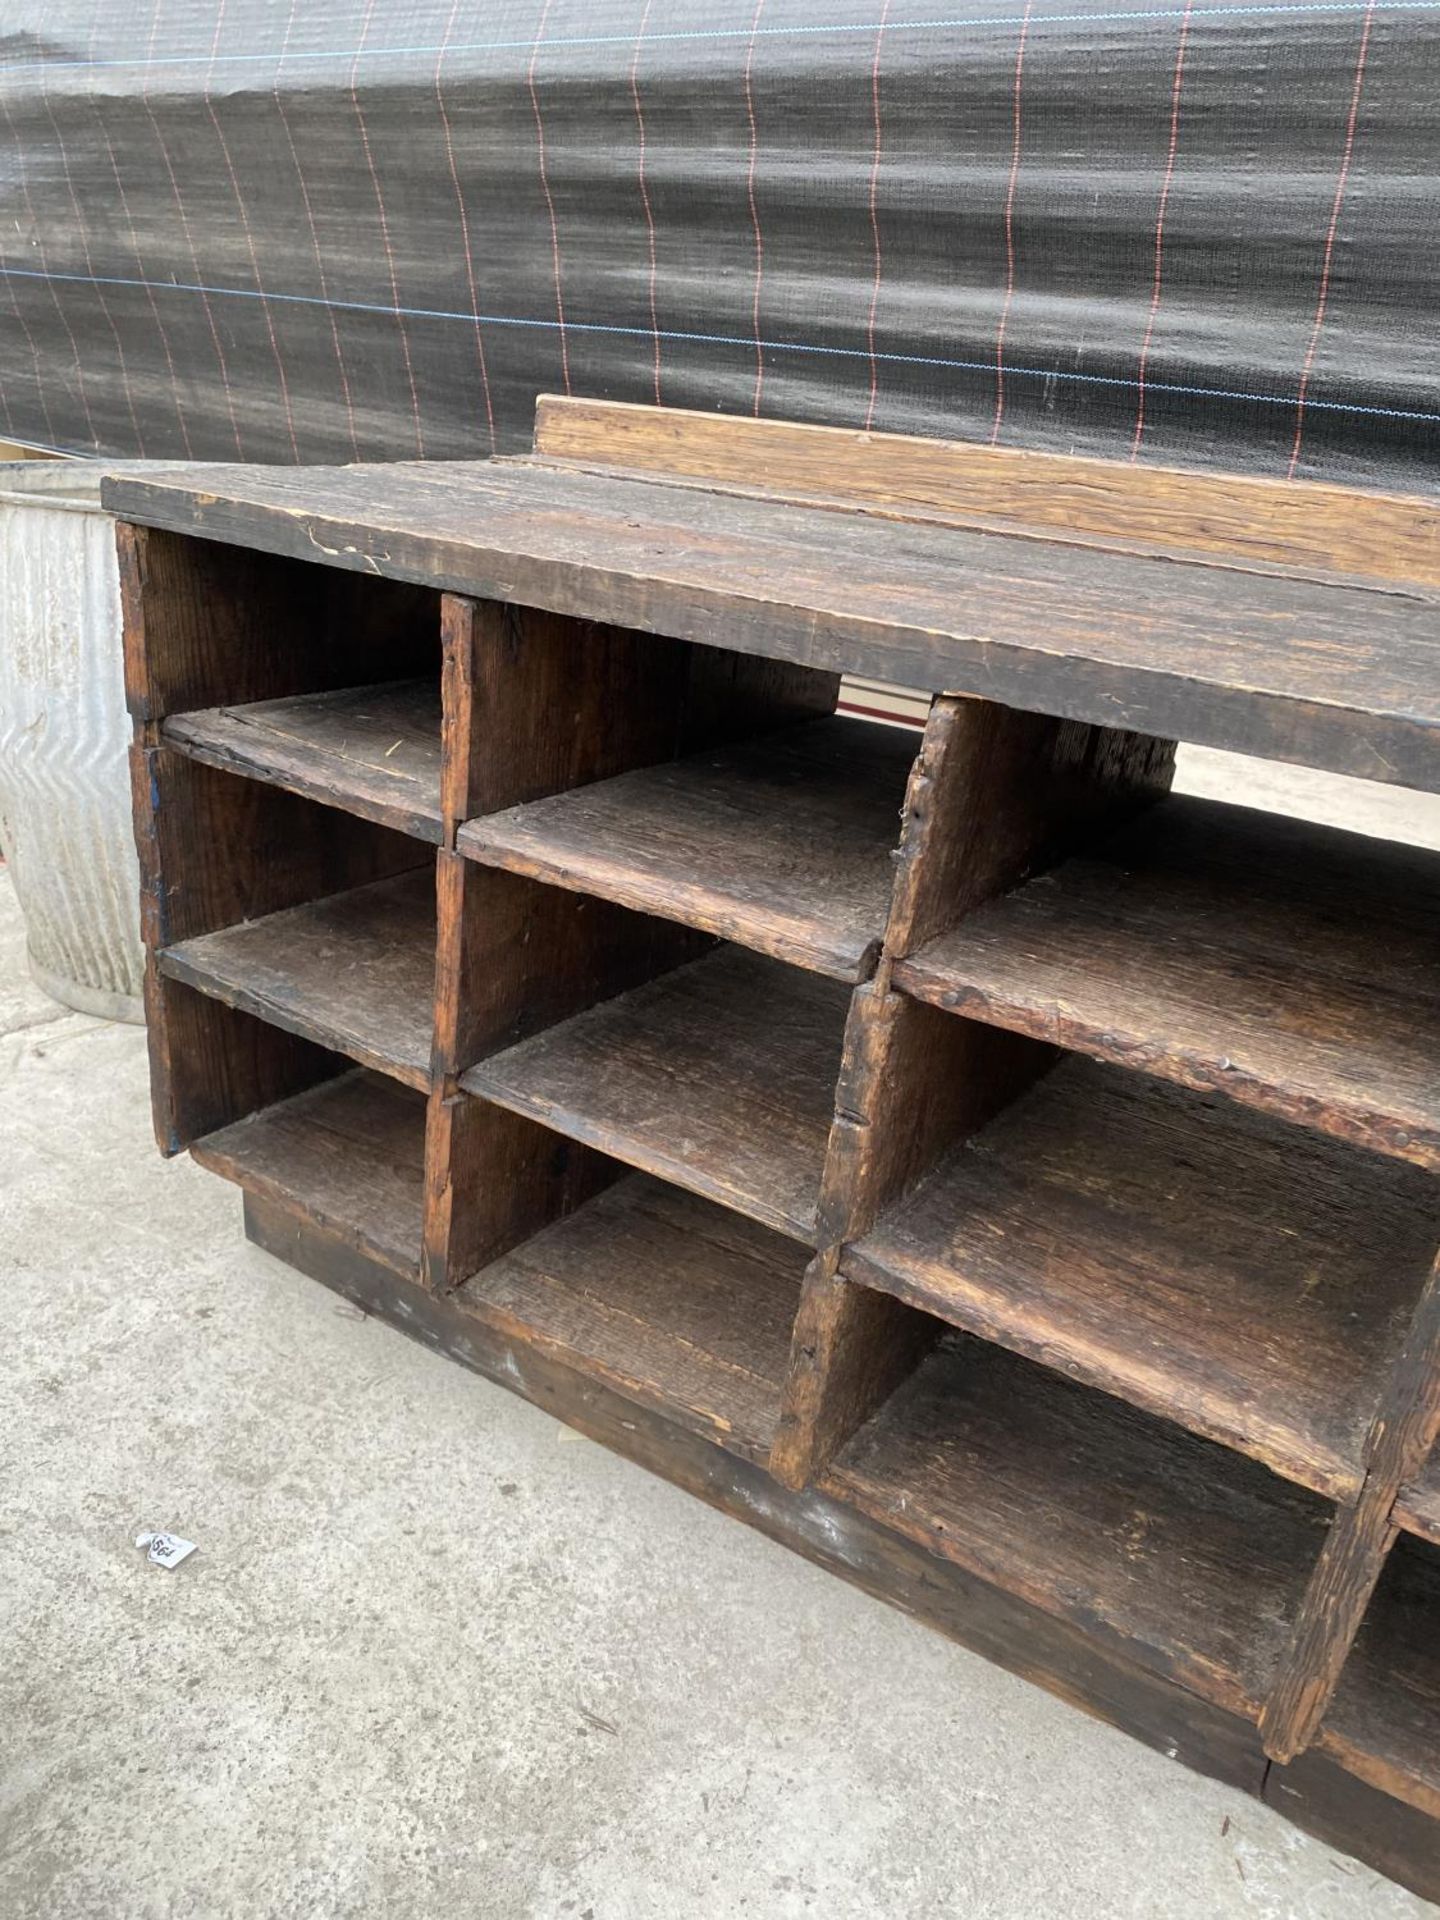 A VINTAGE WOODEN 21 SECTION PIGEON HOLE STORAGE BENCH - Image 5 of 5